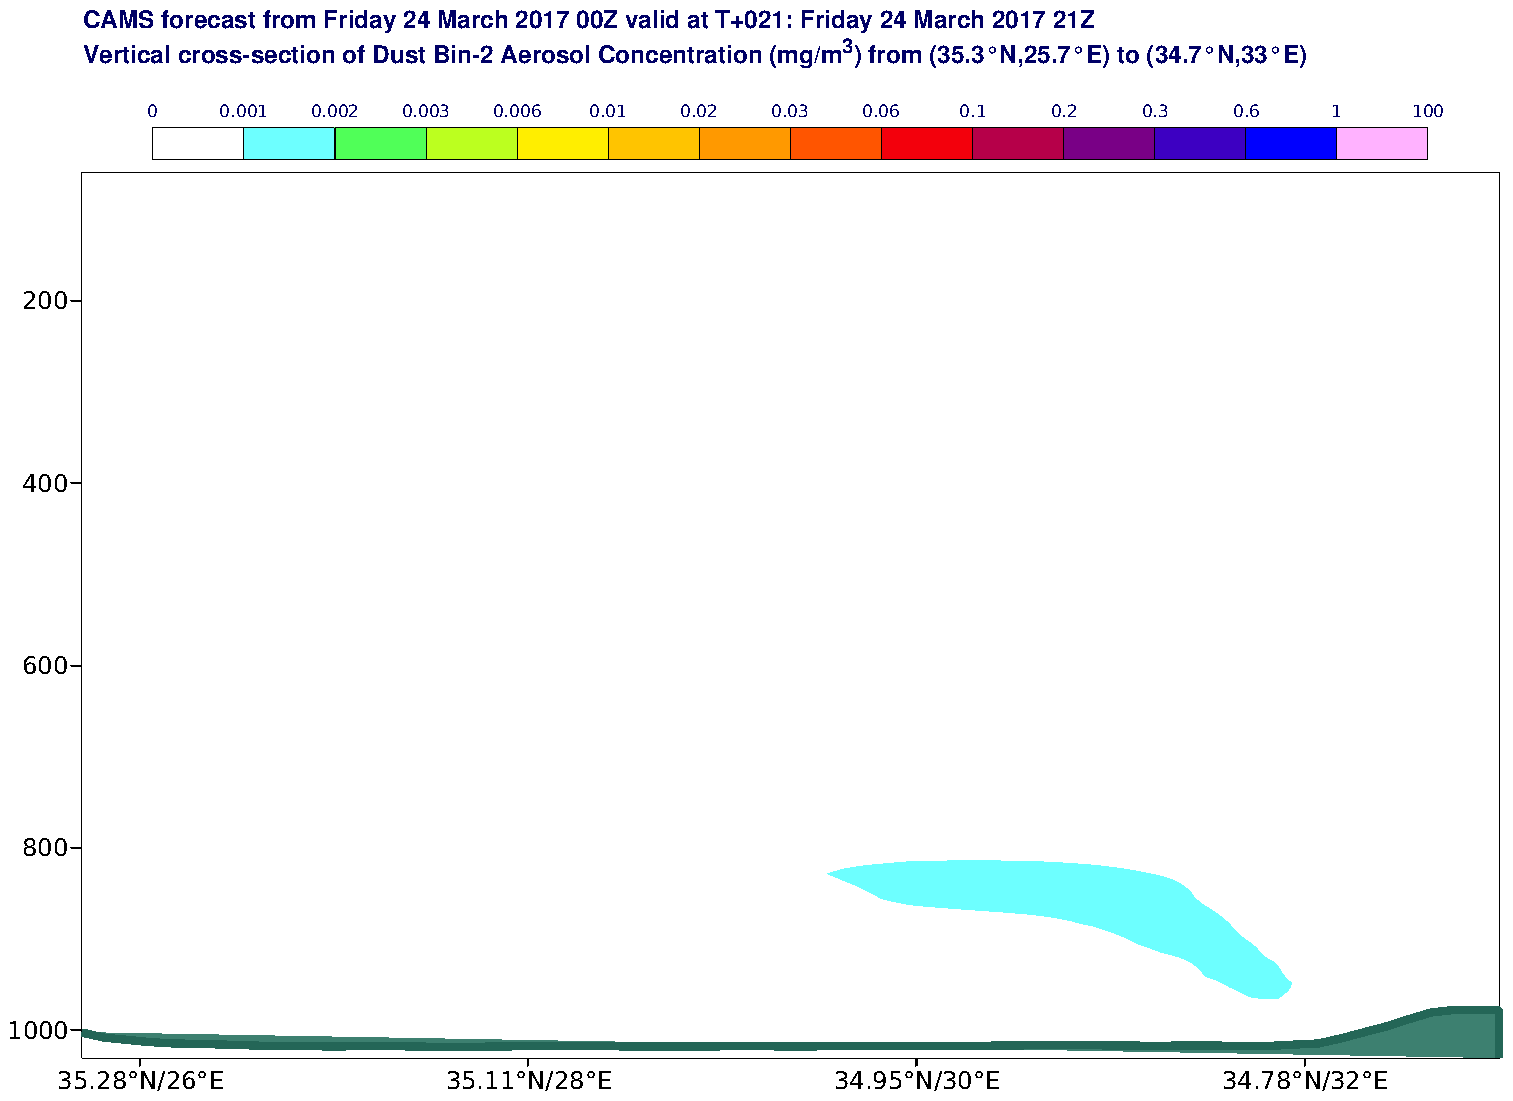 Vertical cross-section of Dust Bin-2 Aerosol Concentration (mg/m3) valid at T21 - 2017-03-24 21:00